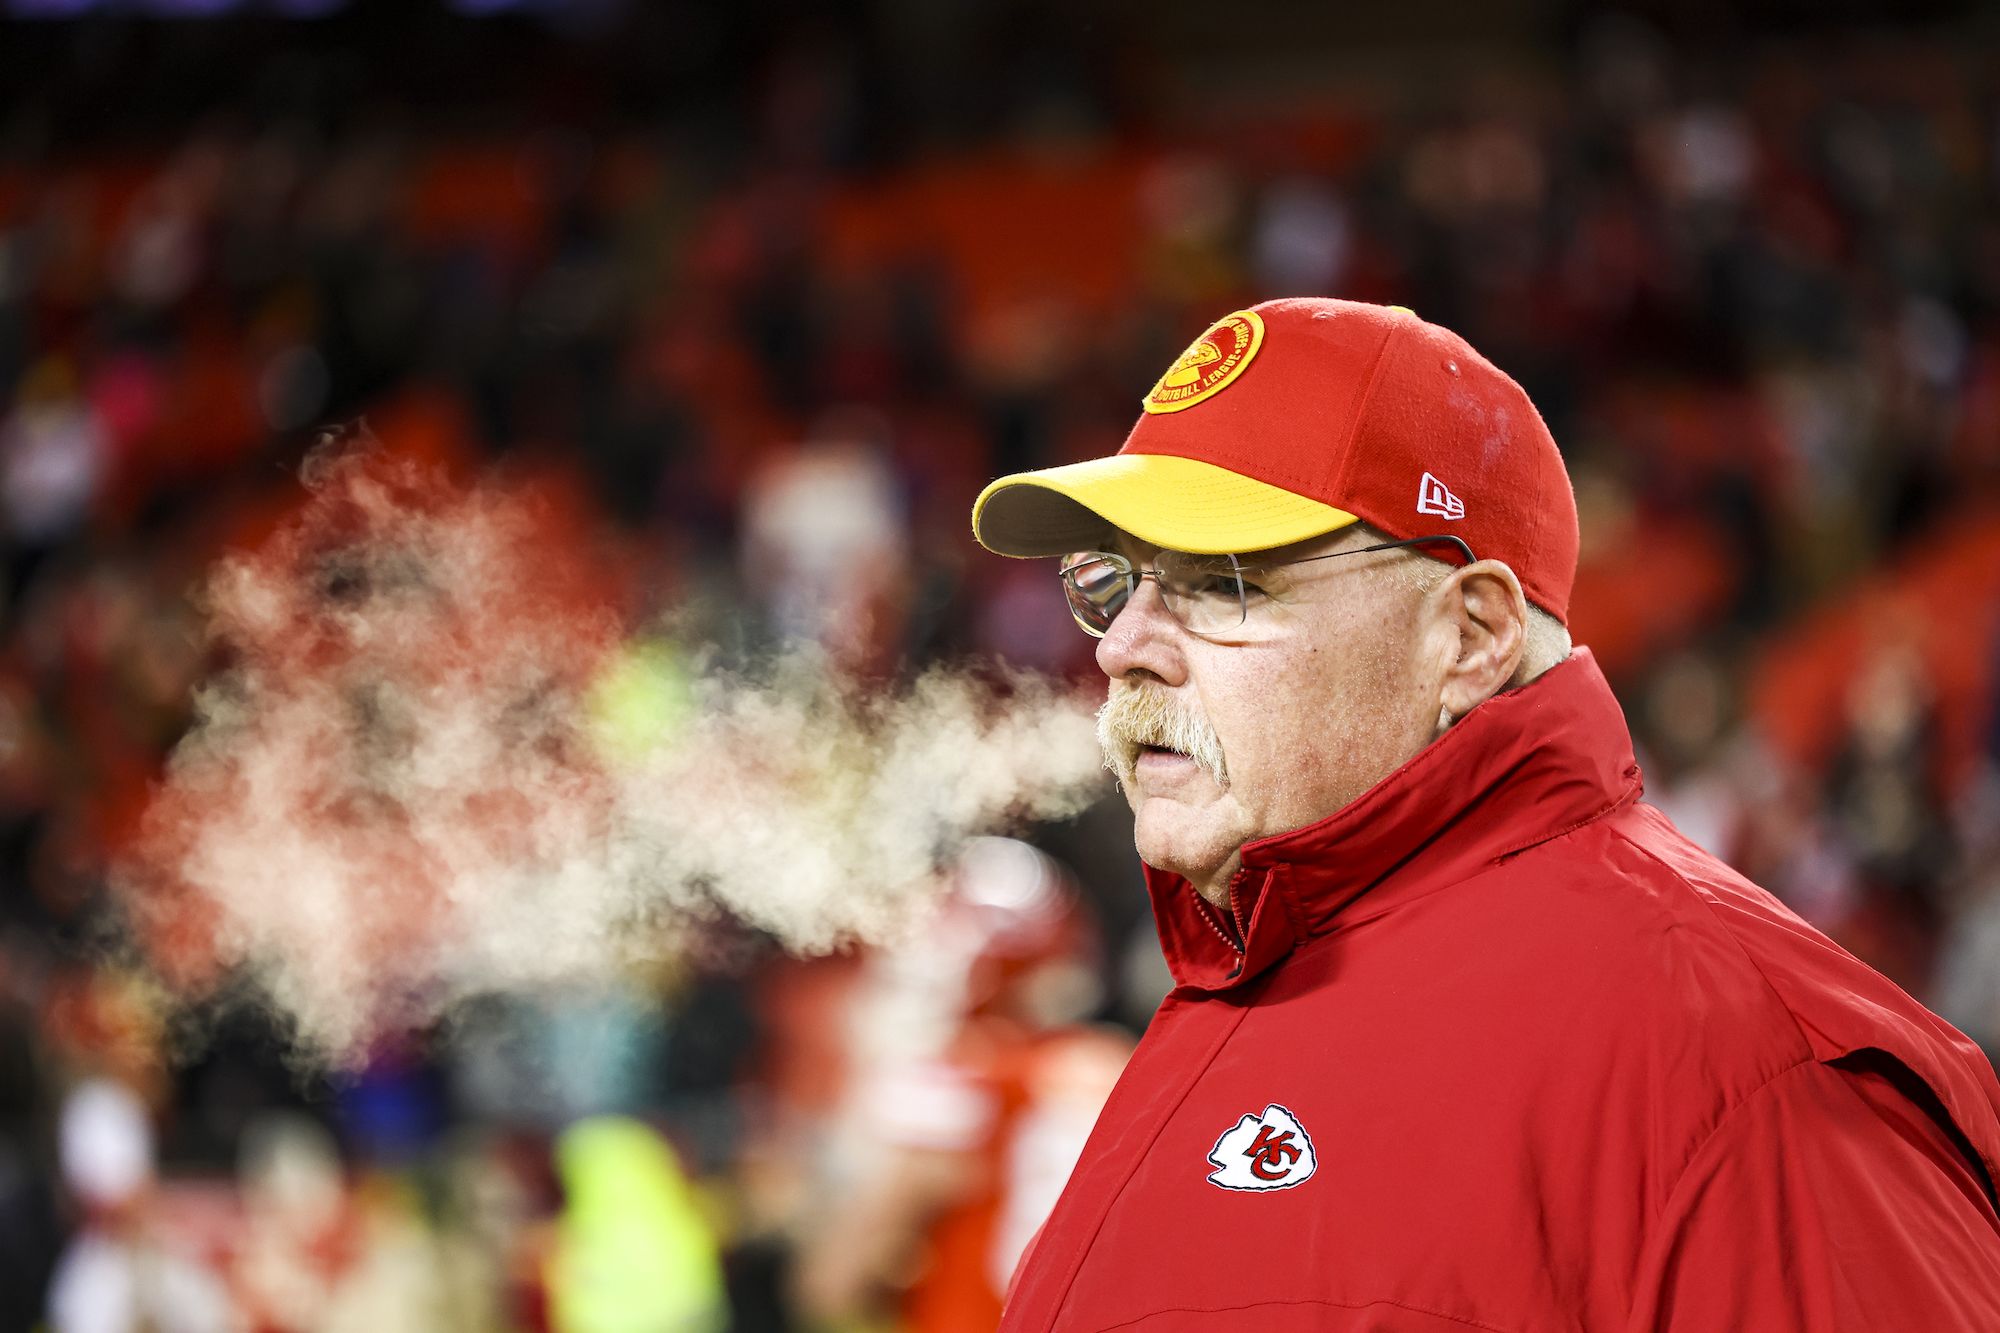 Kansas City Chiefs defeat Miami Dolphins in conditions so cold that head coach Andy Reid's mustache freezes | CNN